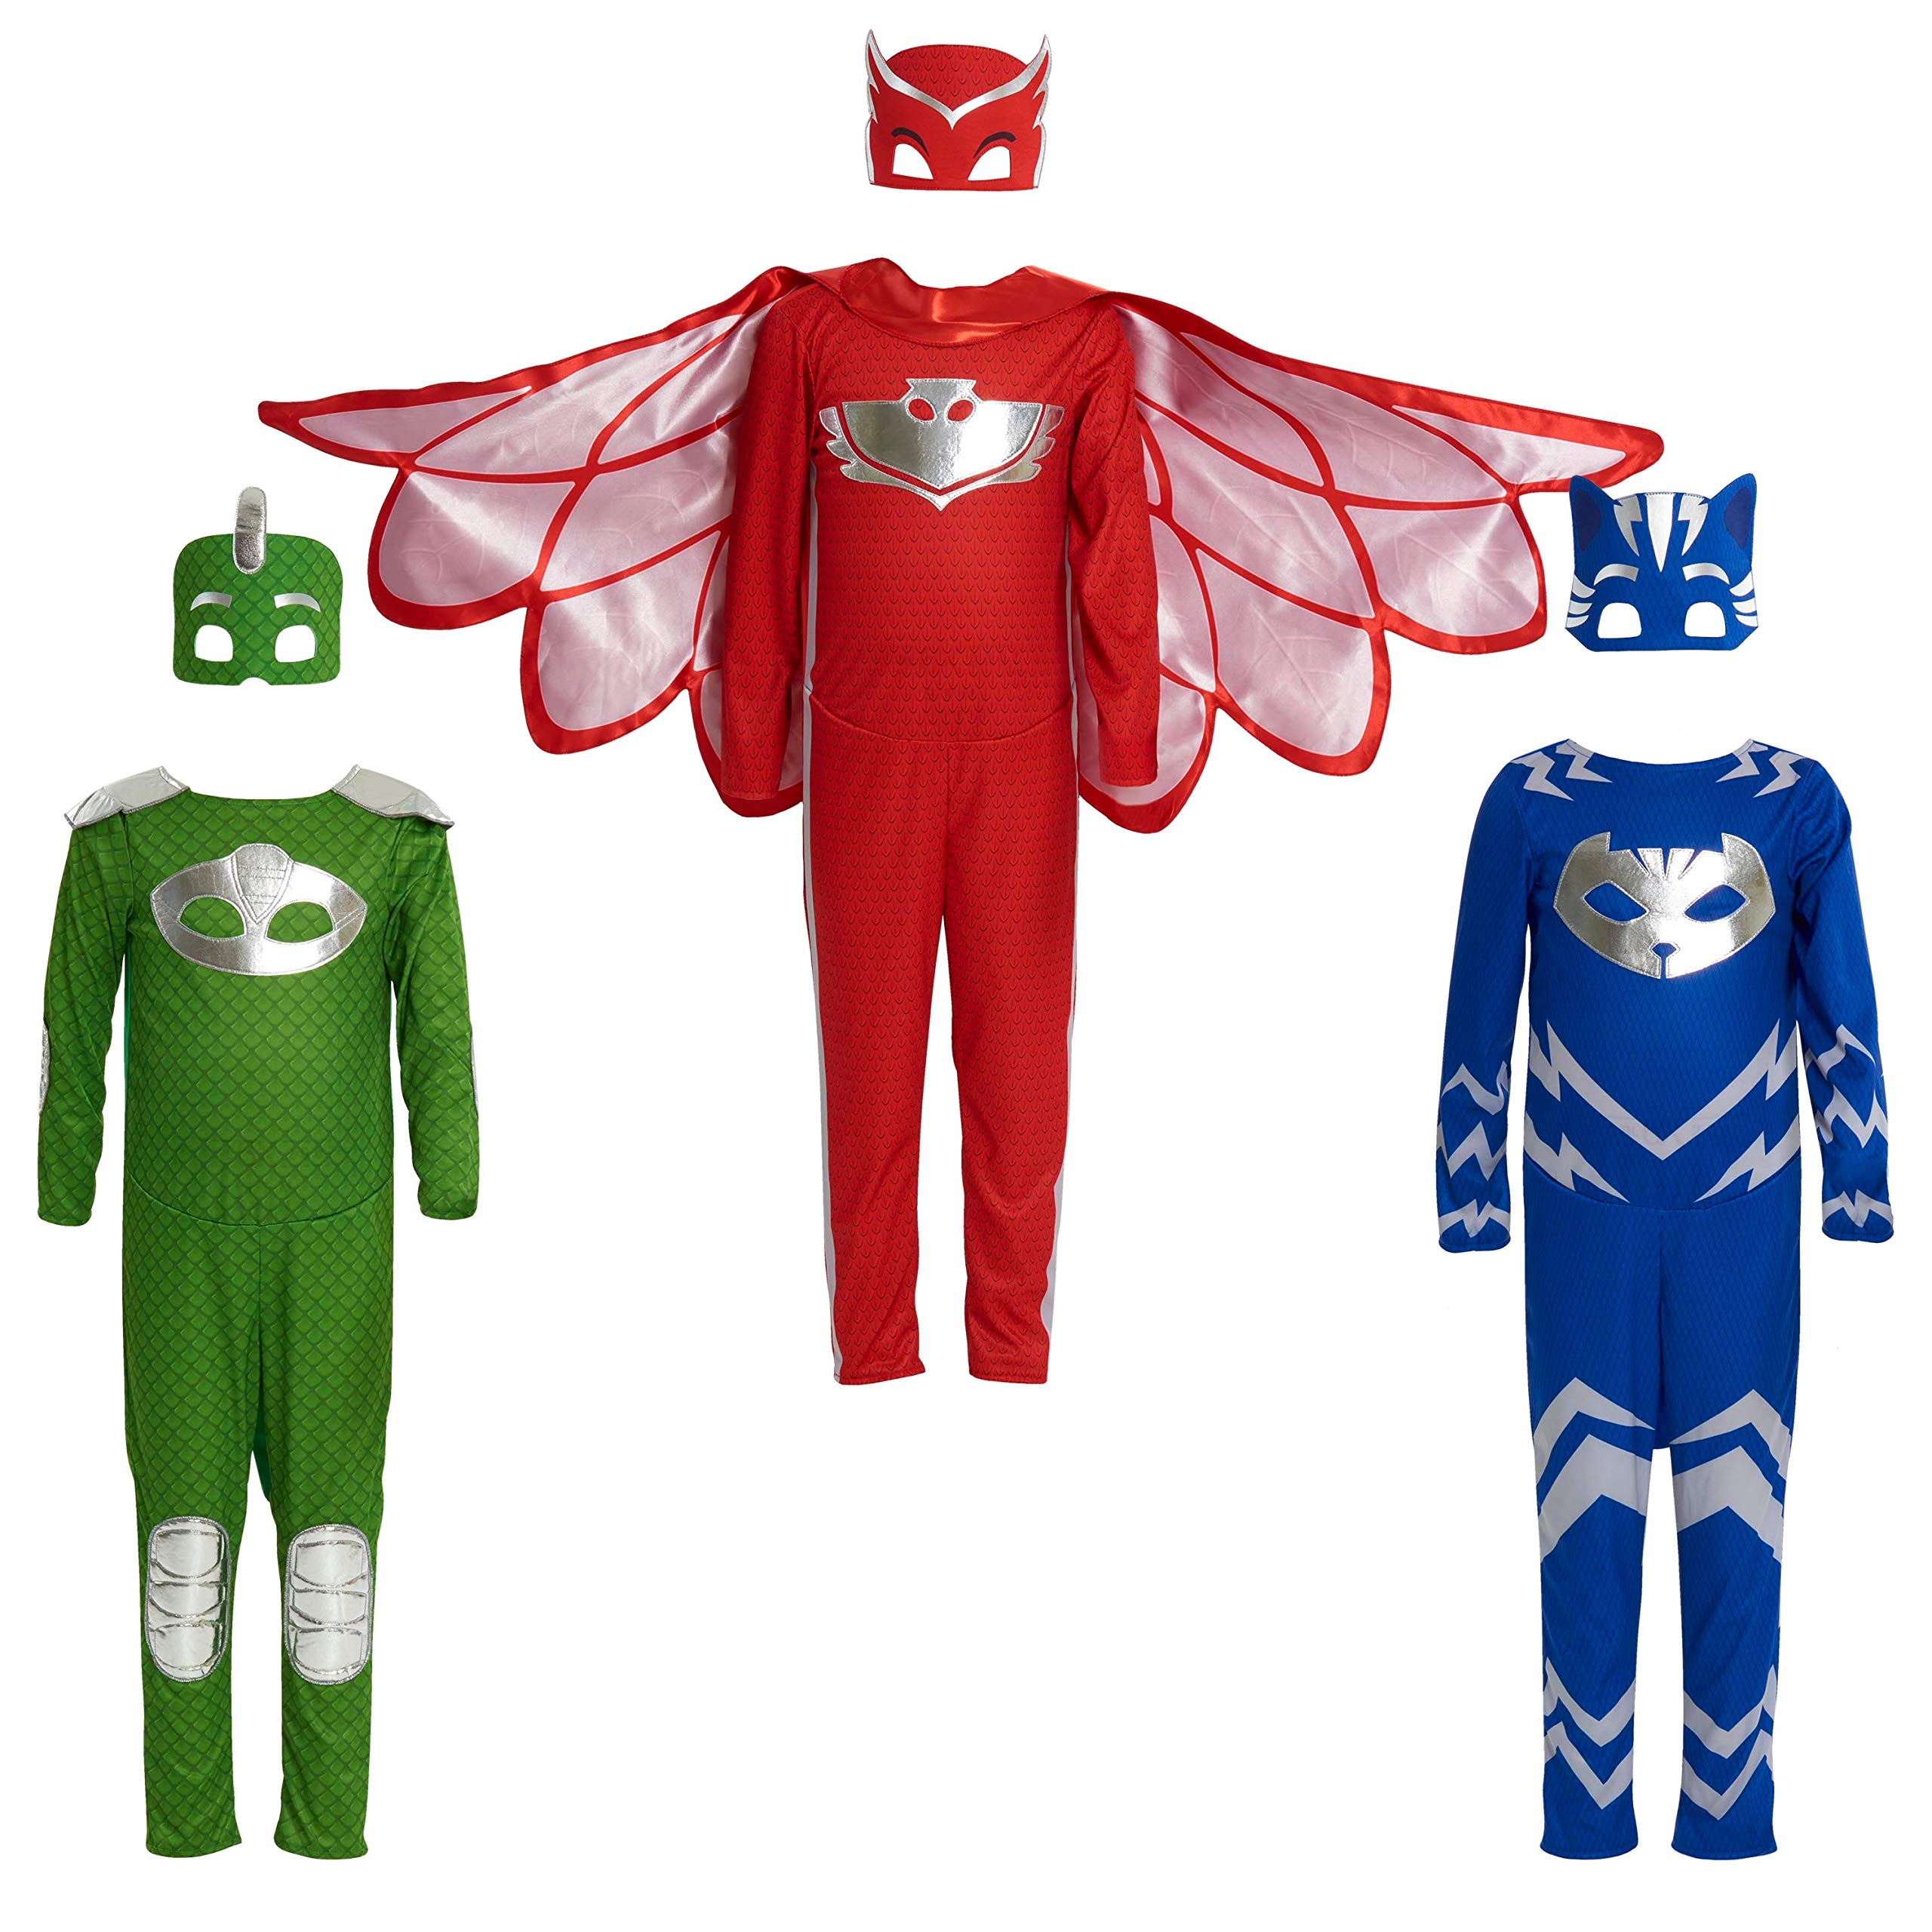 PJ Masks Turbo Blast Owlette Dress Up Set, Kids Toys for Ages 3 Up by Just Play